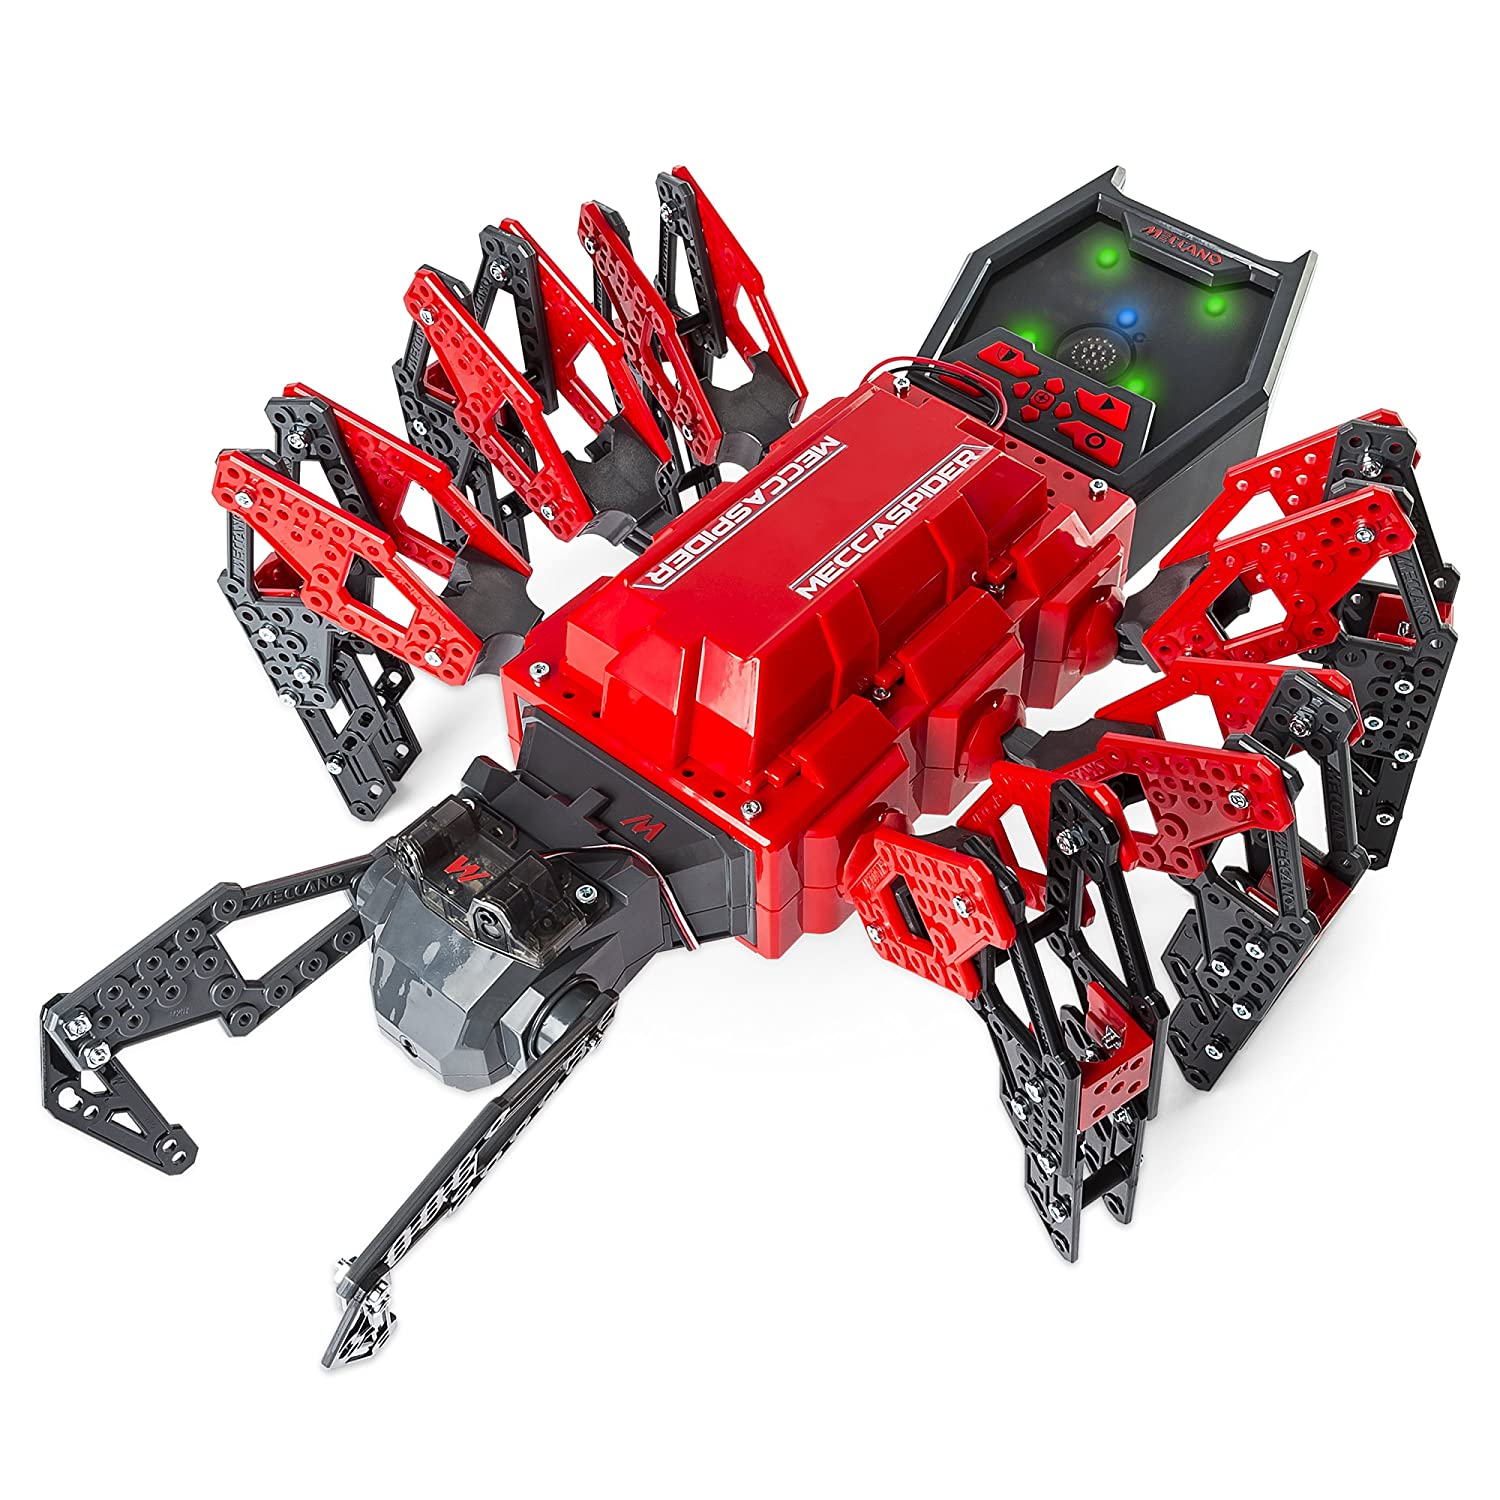 Meccano-Erector – MeccaSpider Robot Kit for Kids to Build, STEM Toy with Interactive Built-in Games and App